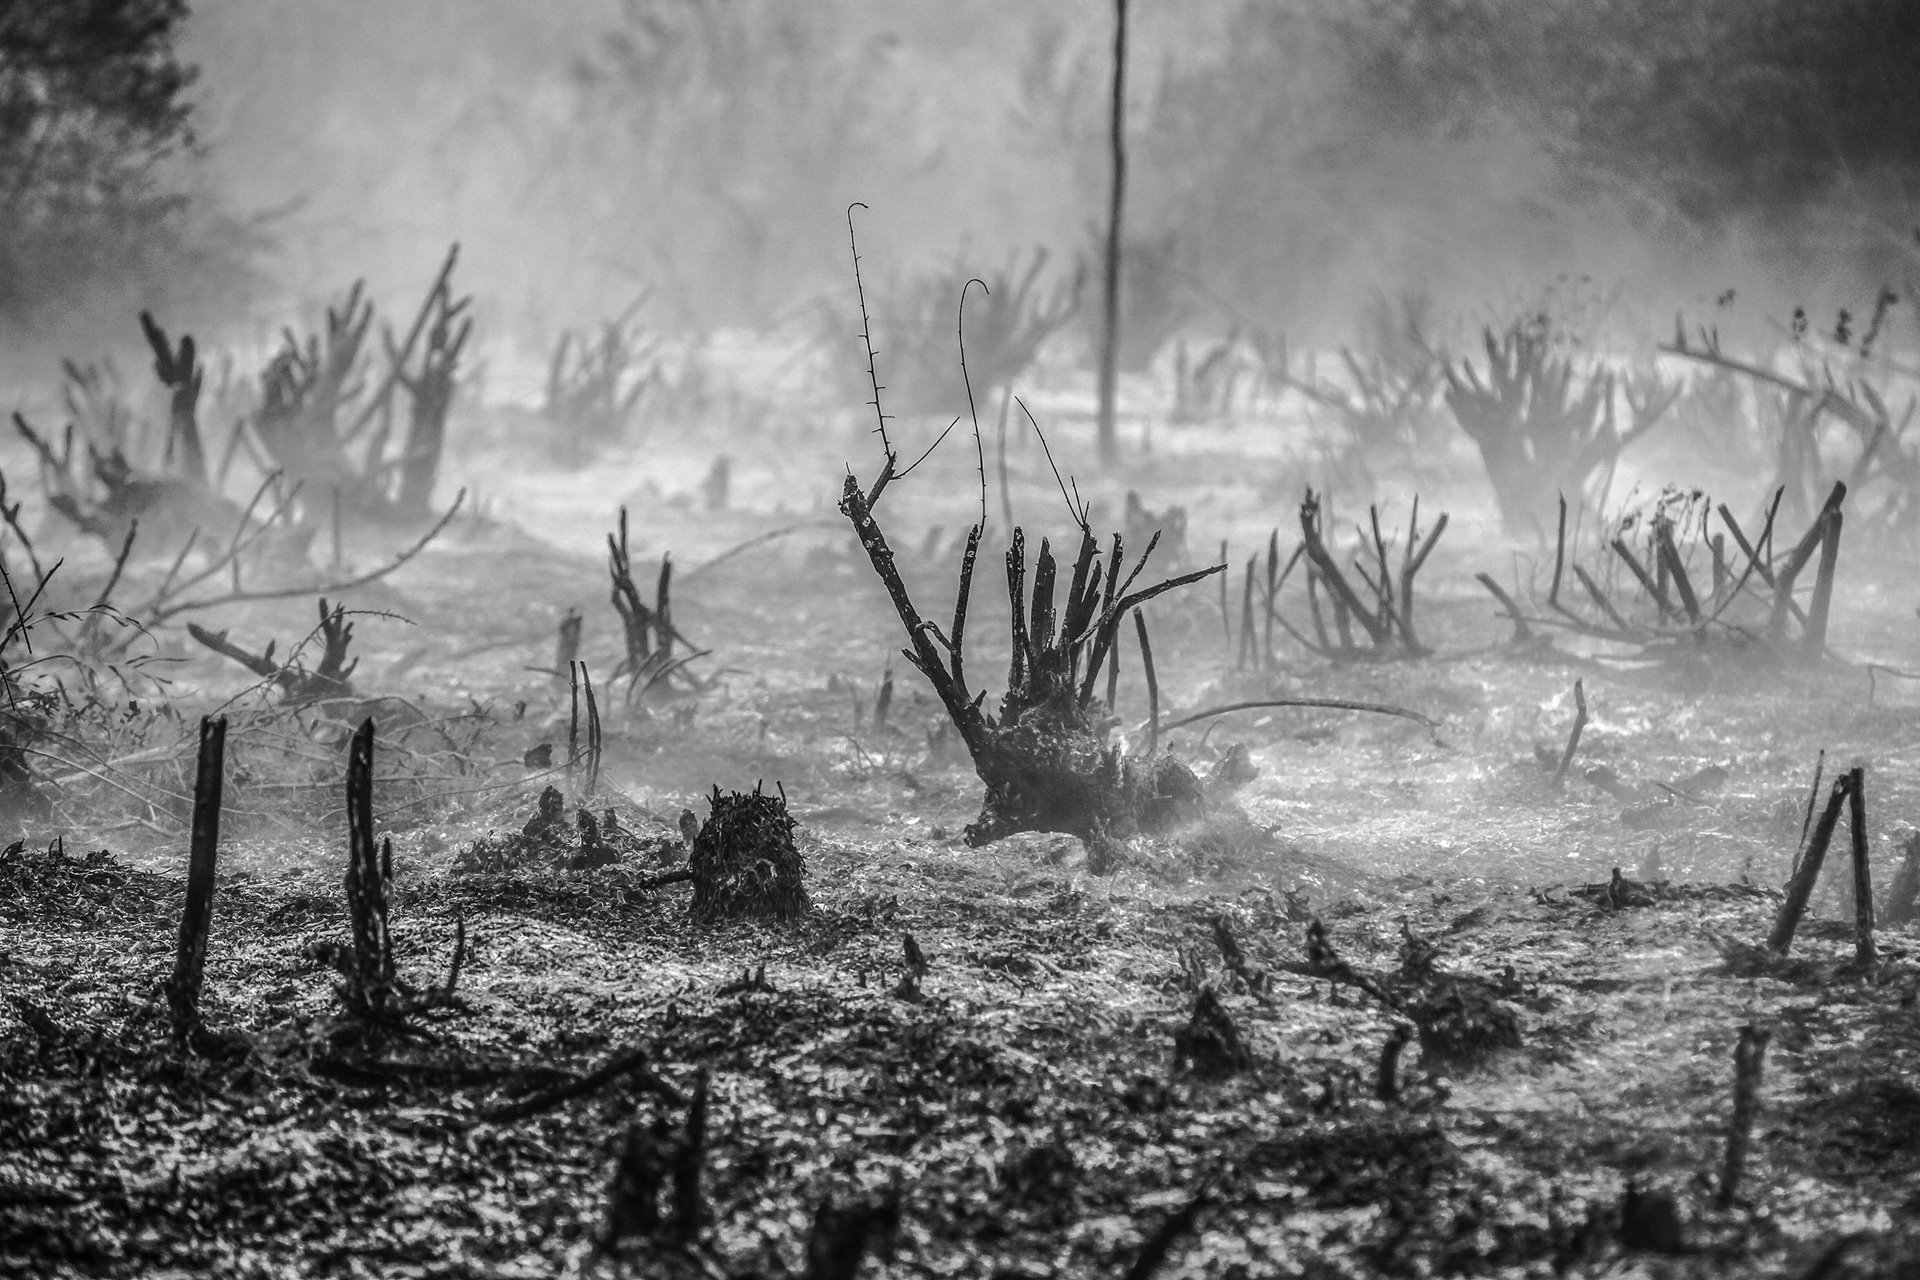 <p>Vegetation smolders after a peatland and forest fire in Rambutan, South Sumatra, Indonesia.</p>
